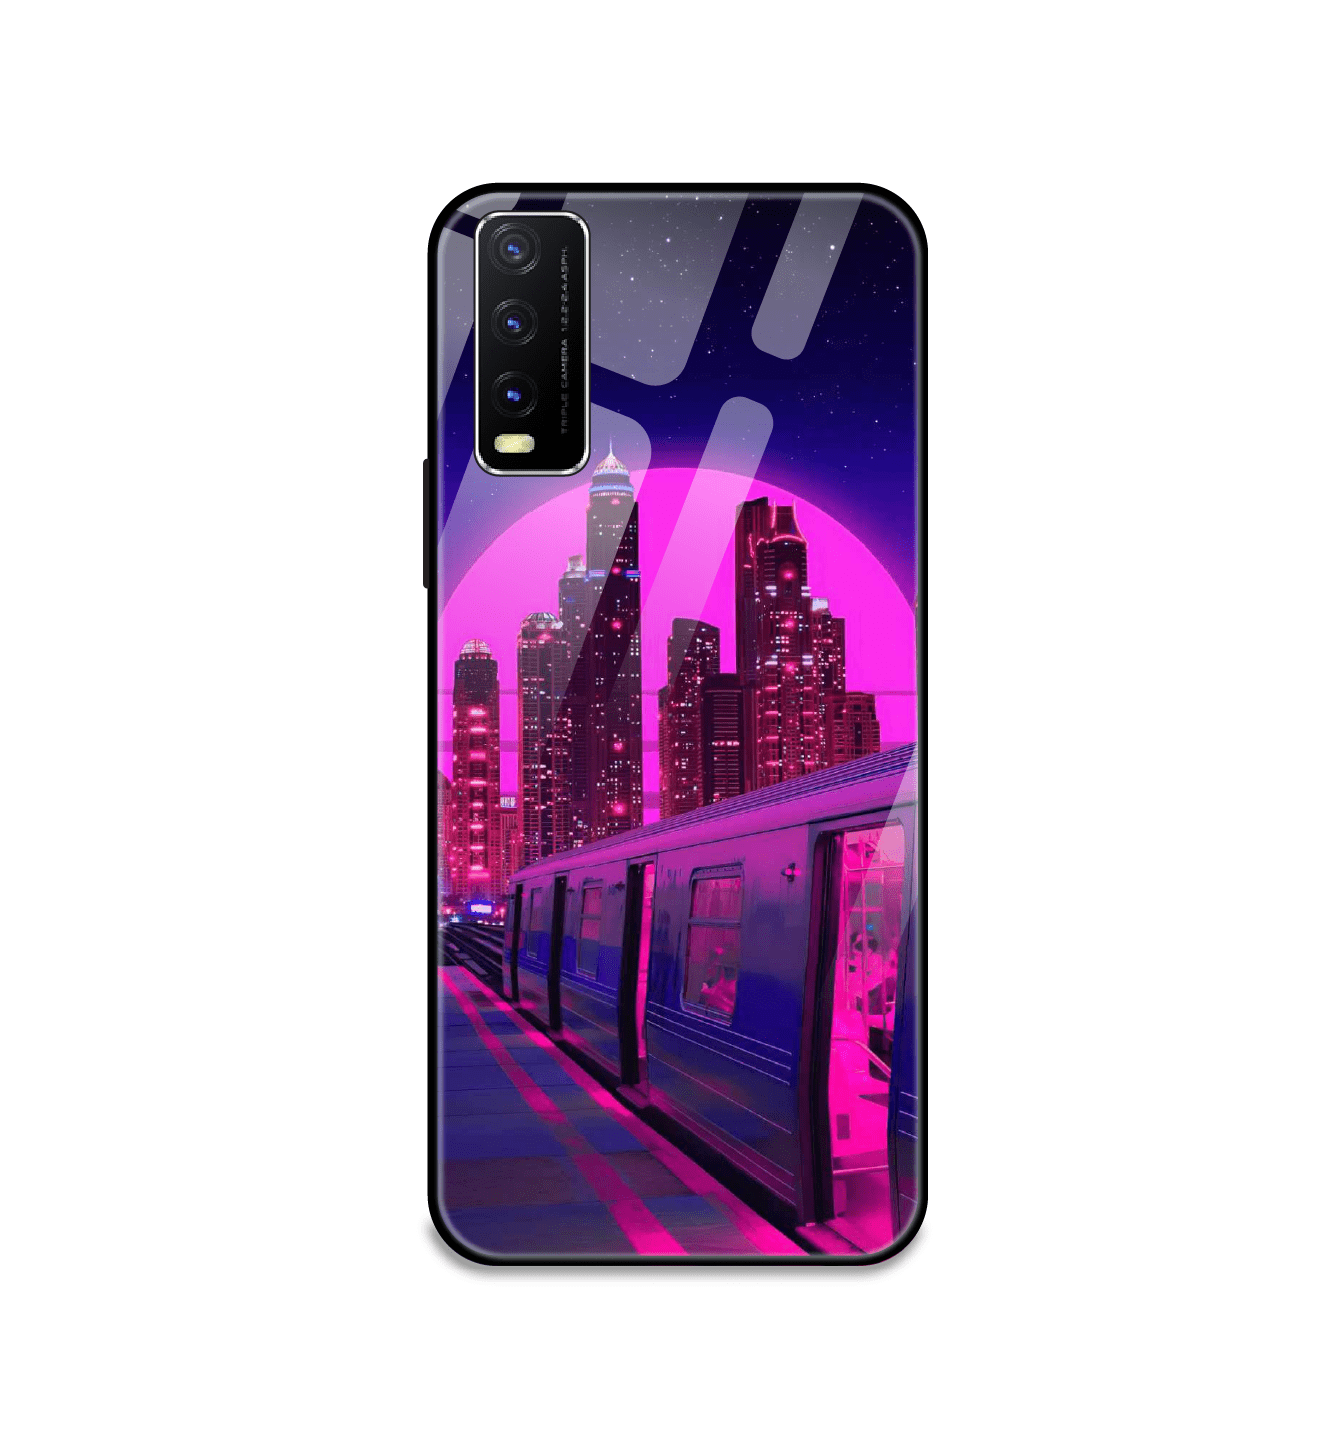 Neon City Synthwave - Glass Cases For Vivo Models